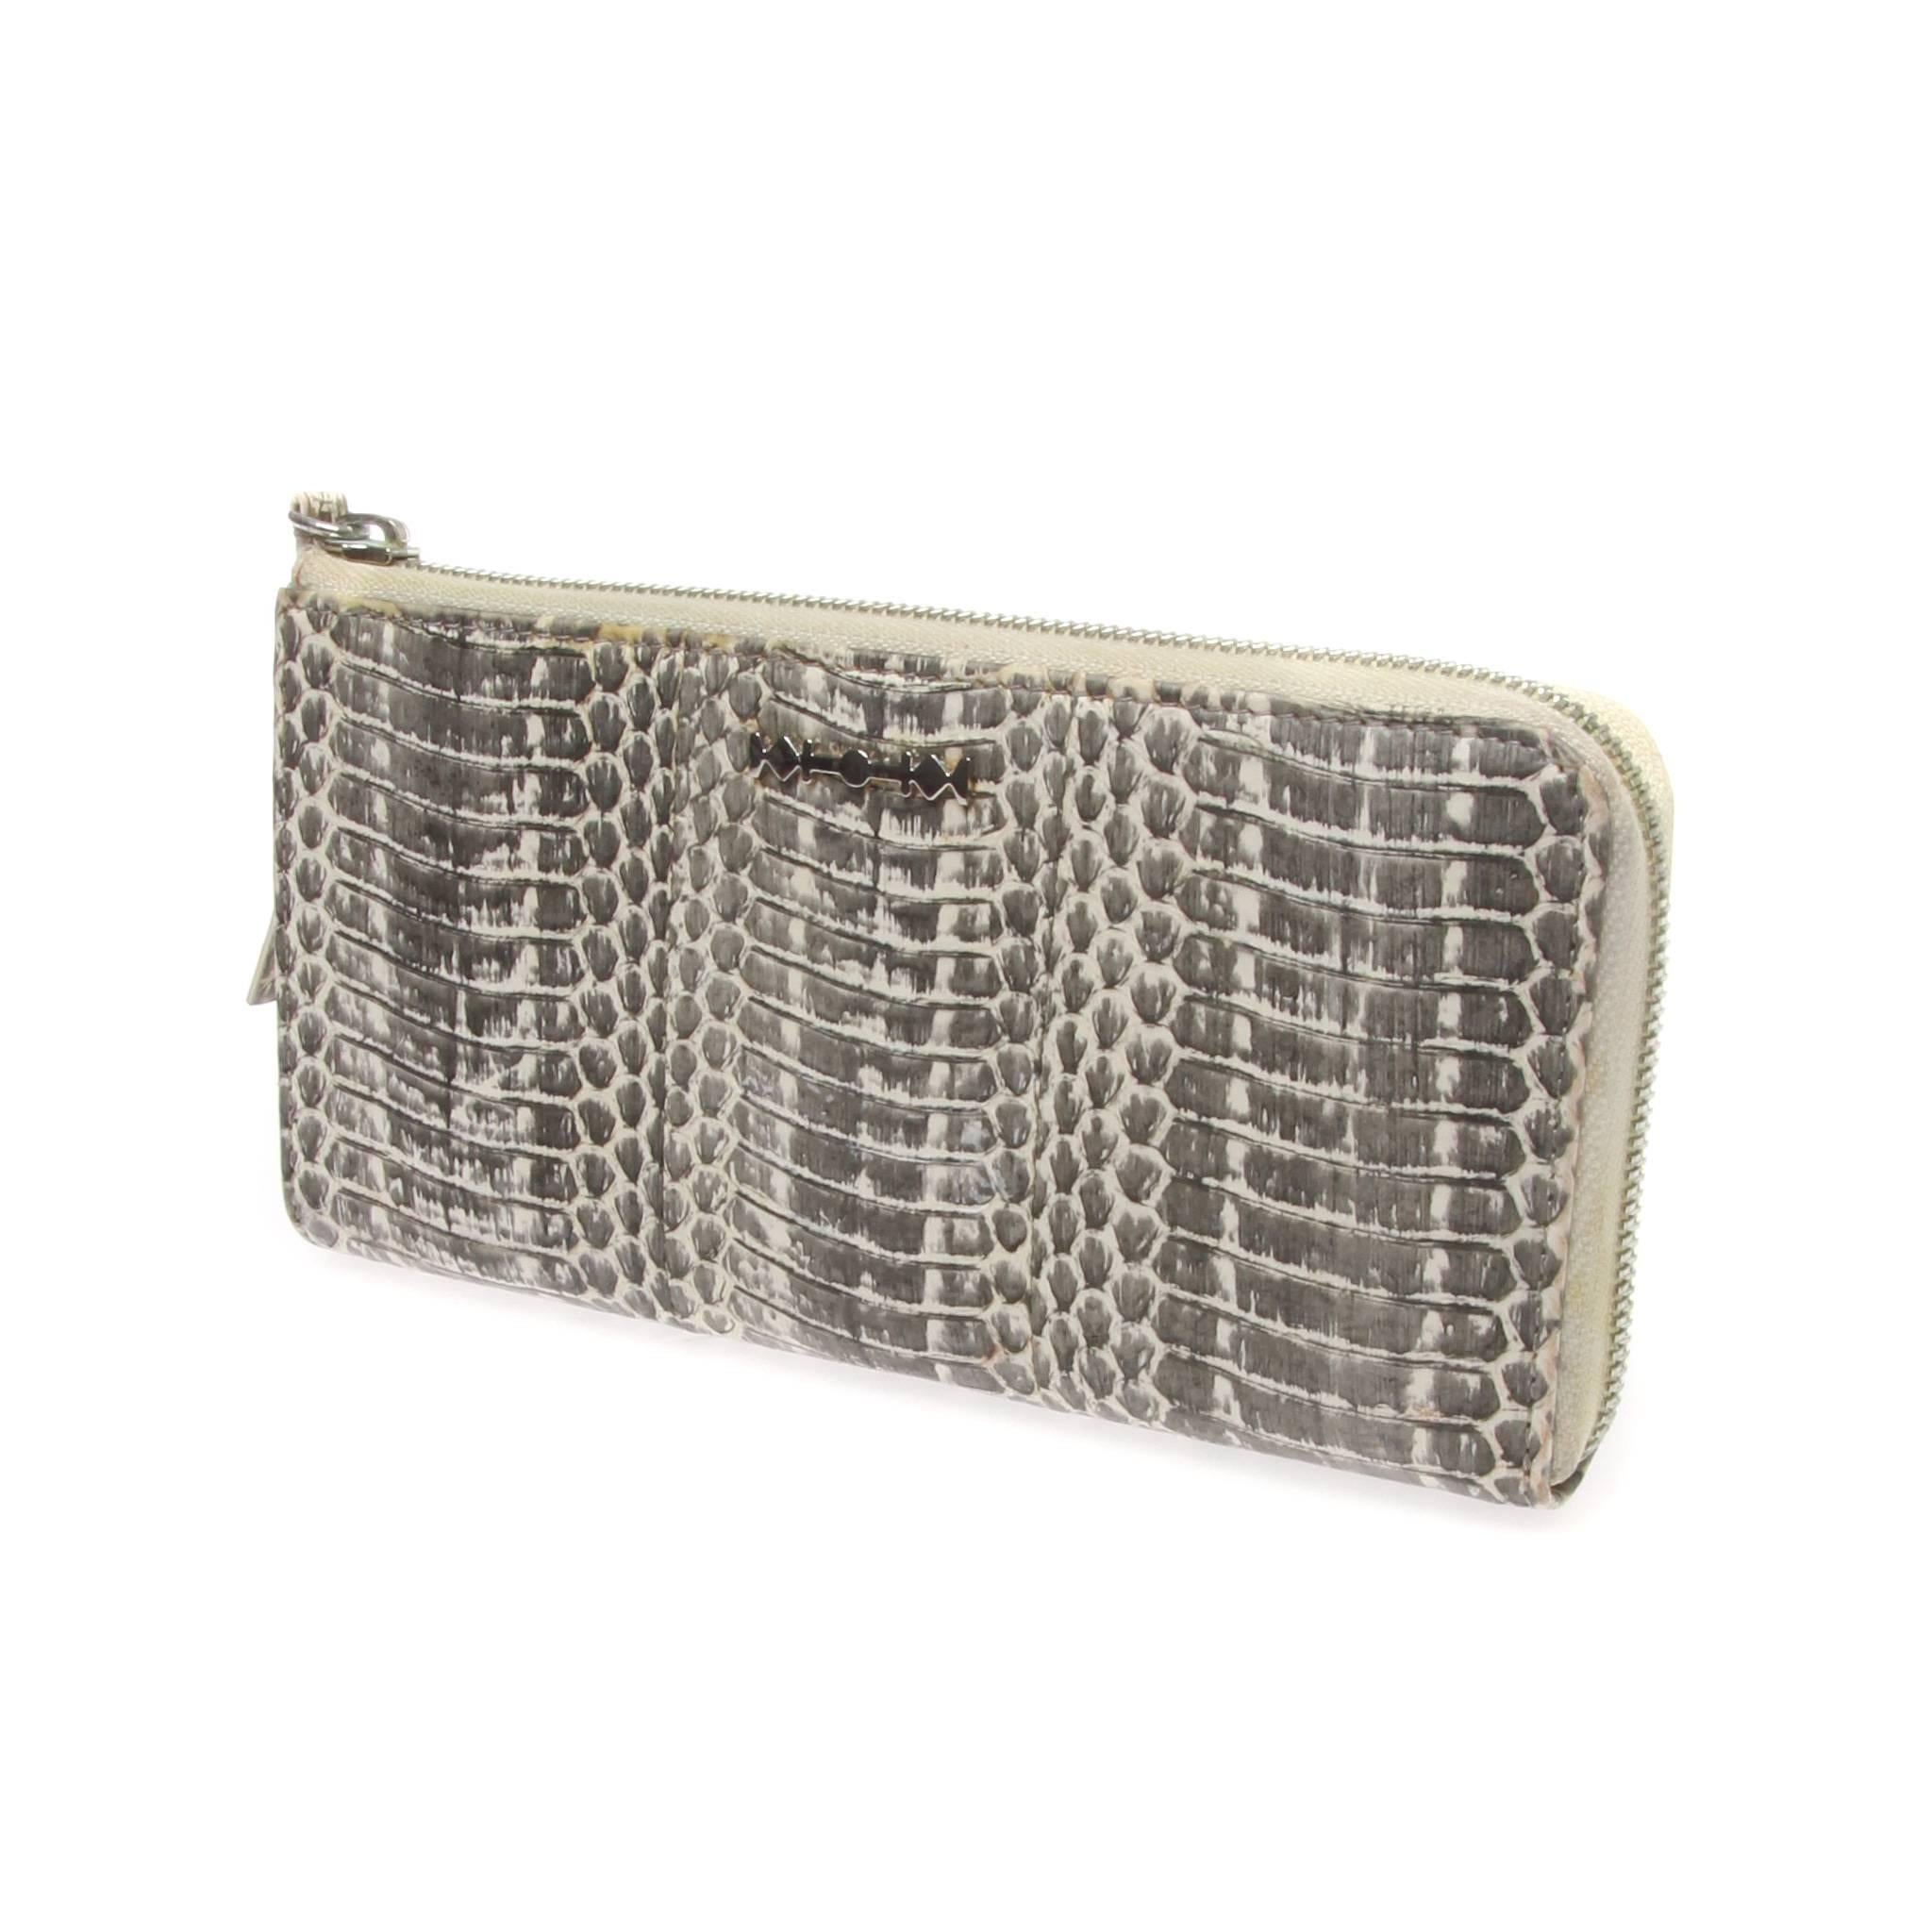 	
Alexander McQueen Grey Python Purse
Simple but handy for daily use.
Features a Zipped closure which allows for better organisation.
Colour: Grey and Off White
Hardware: Silver
Closure/Opening: Zip 